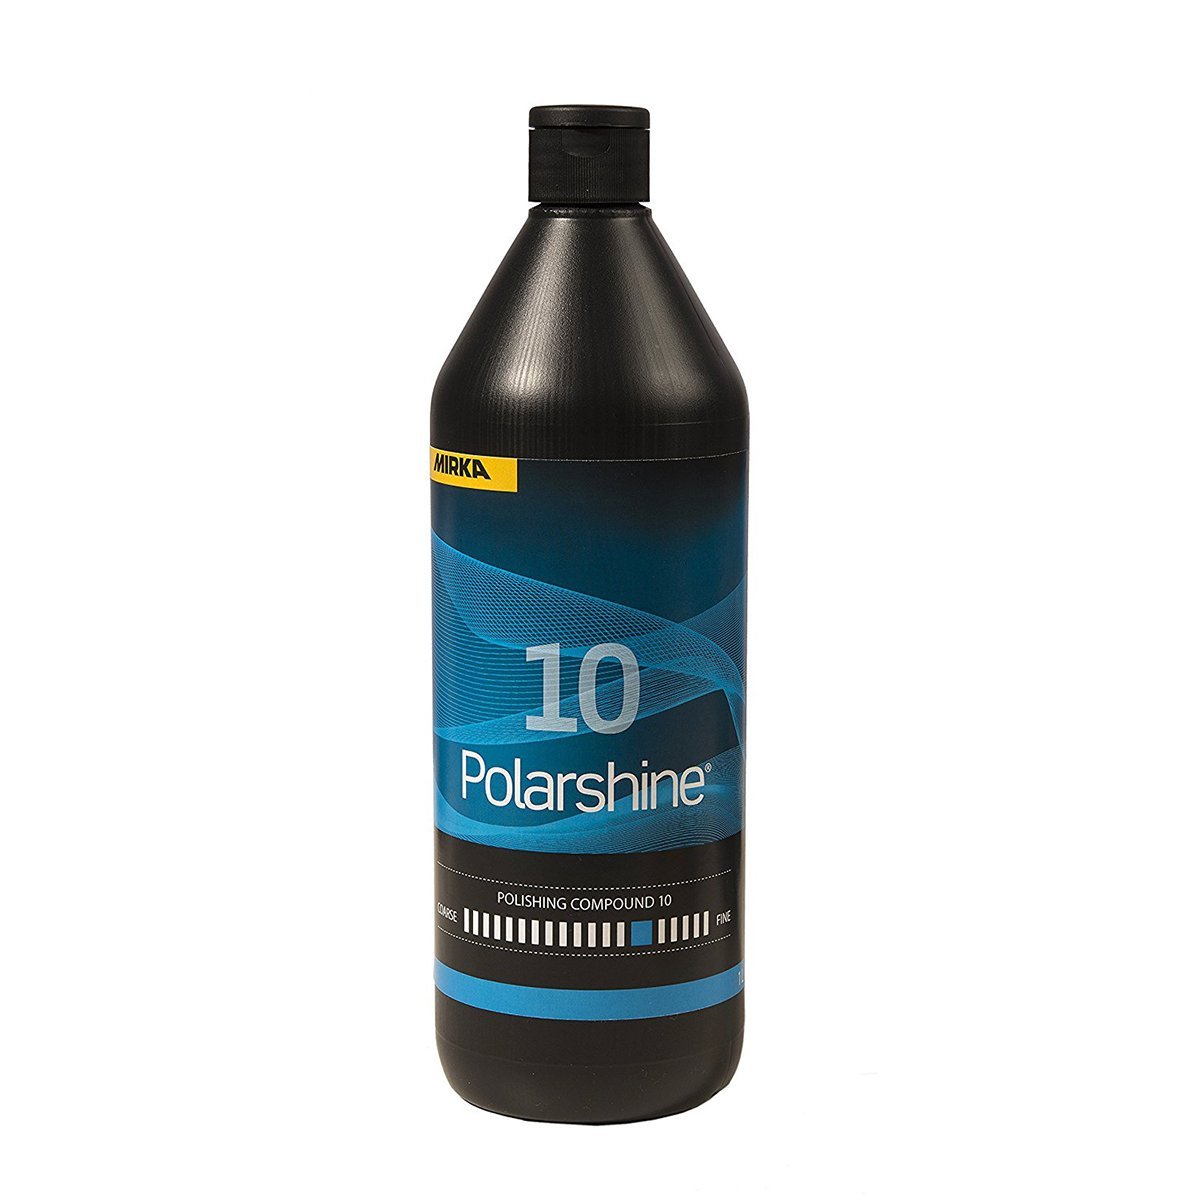 A 1L bottle of Mirka's Polarshine 10 abrasive compound for polishing. Scale on label shows that it is about medium-fine.